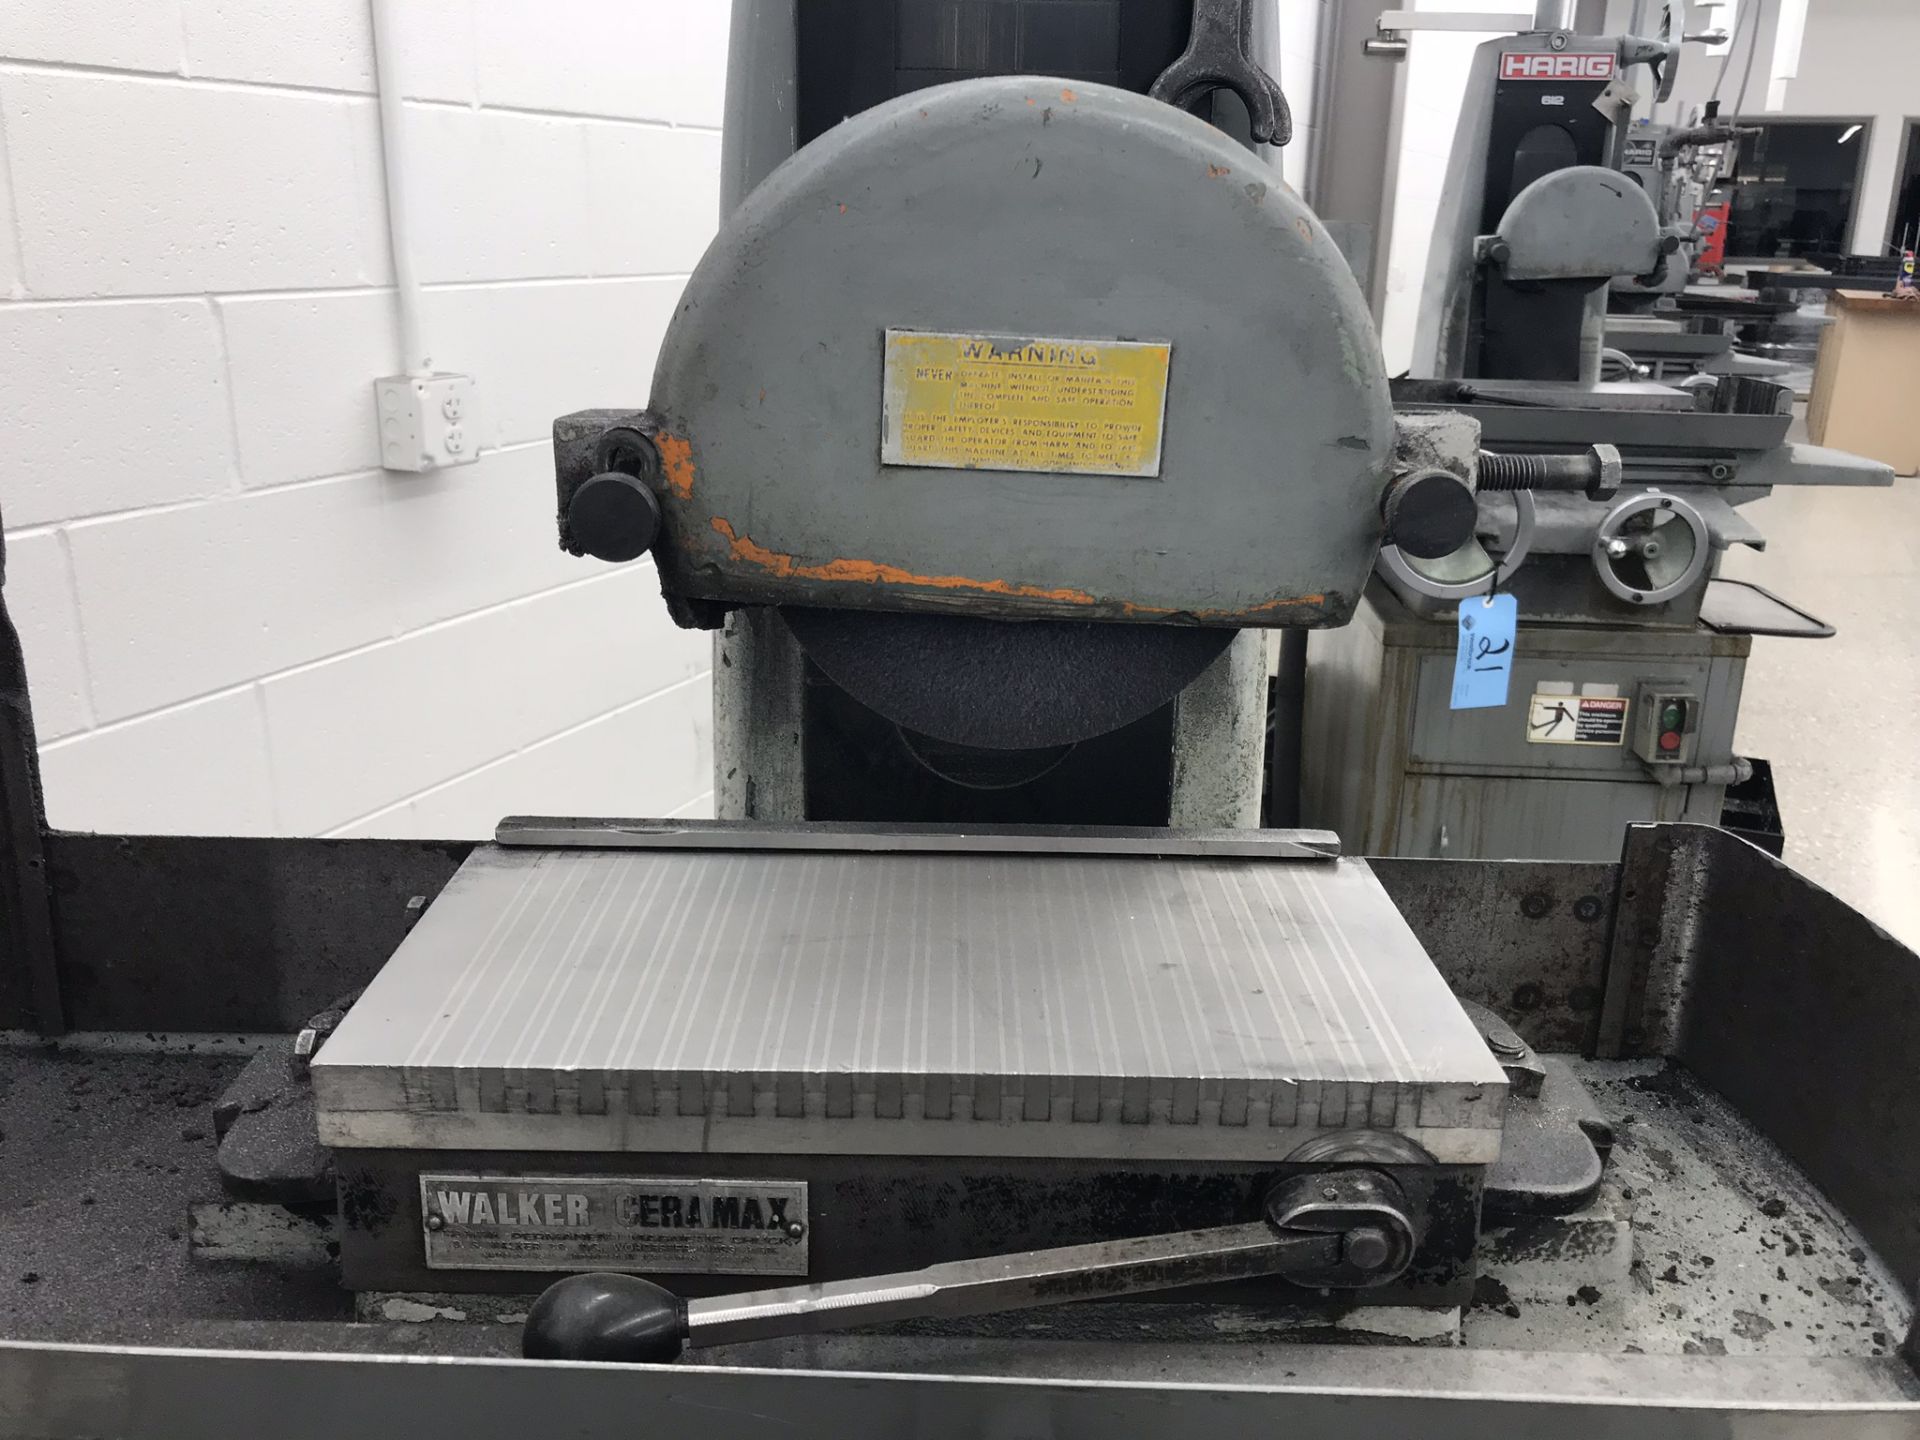 Harig 612 6" x 12" Surface Grinder, 6" x 12" Permanent Magnetic Chuck, Coolant - Image 2 of 3